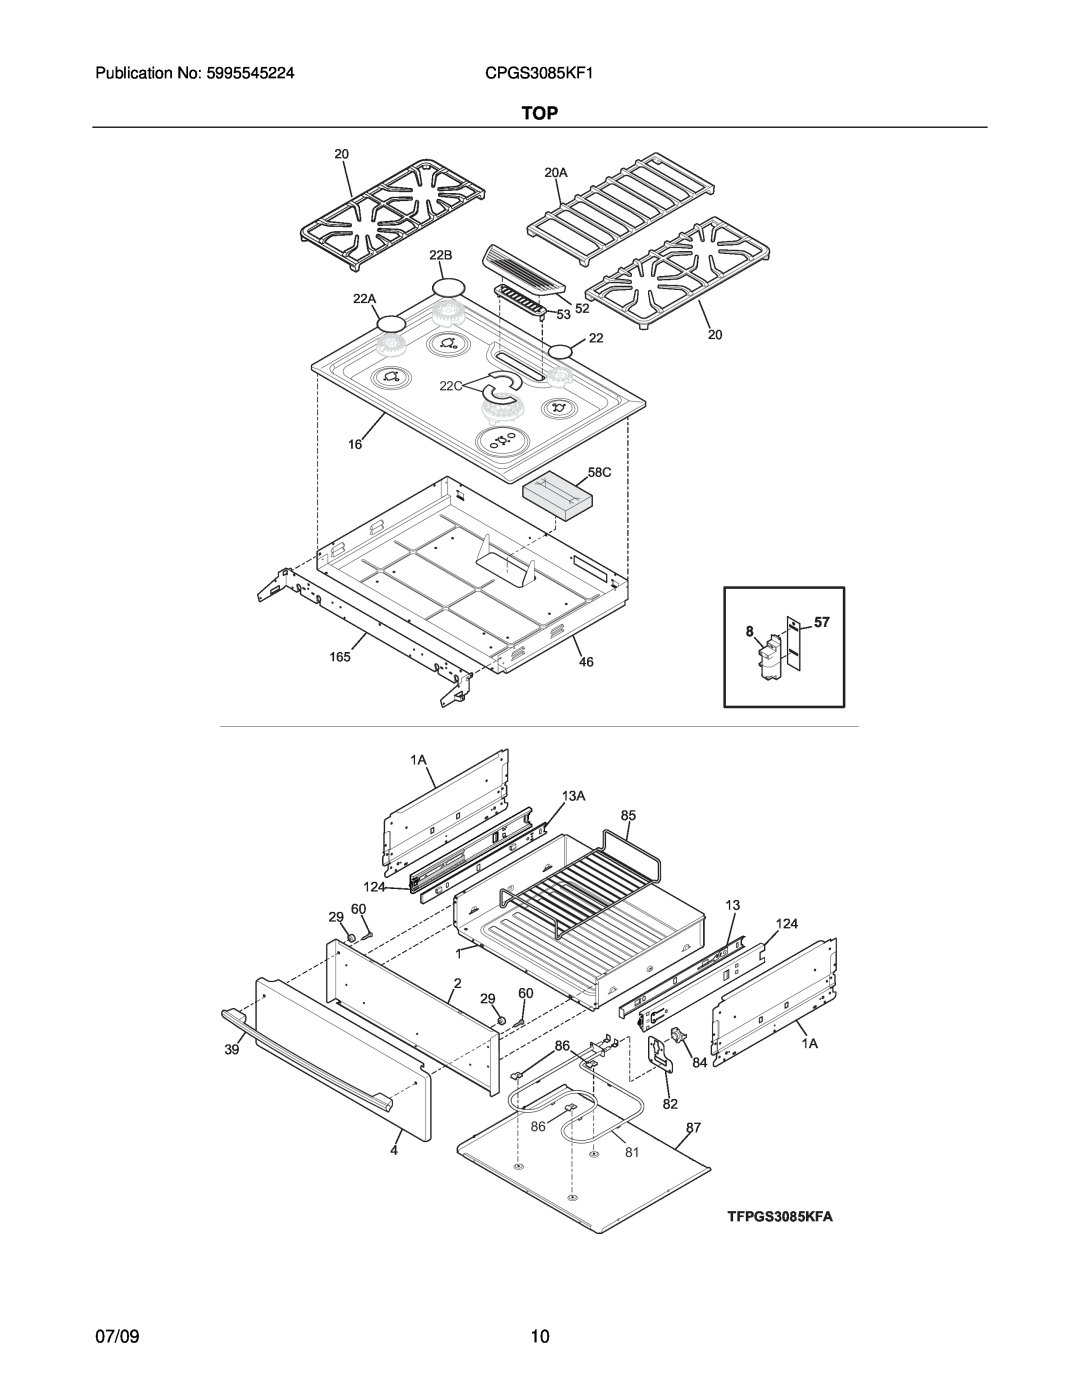 Electrolux CPGS3085KF1, 39452391M93S1 installation instructions 07/09, 20A 22B 22A, 2220 22C, 1A 13A 